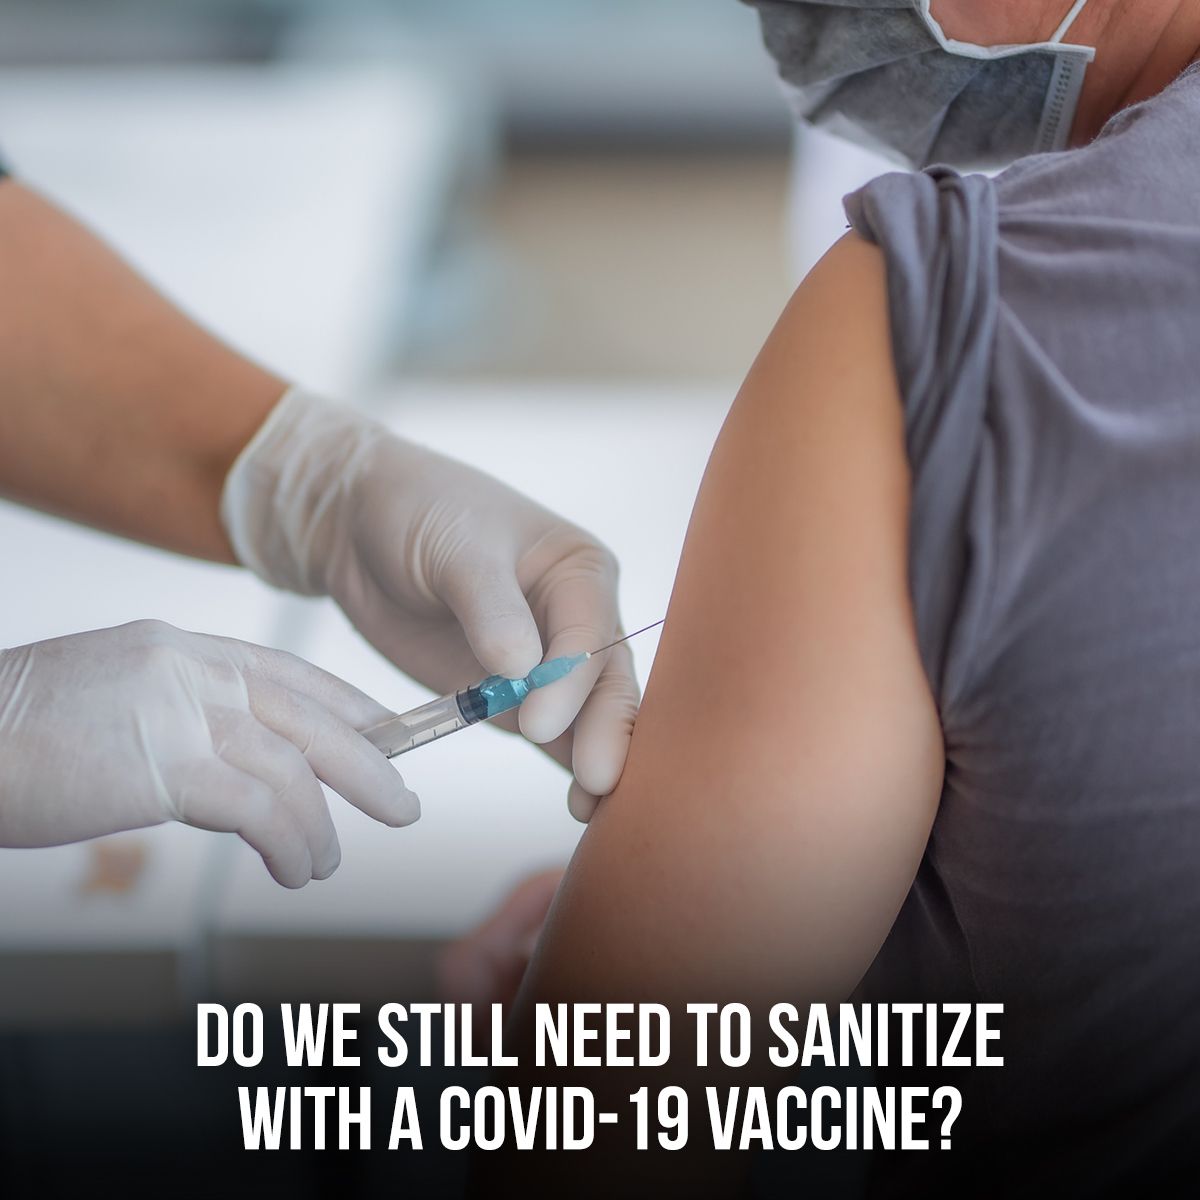 DO WE STILL NEED TO SANITIZE WITH A COVID-19 VACCINE?